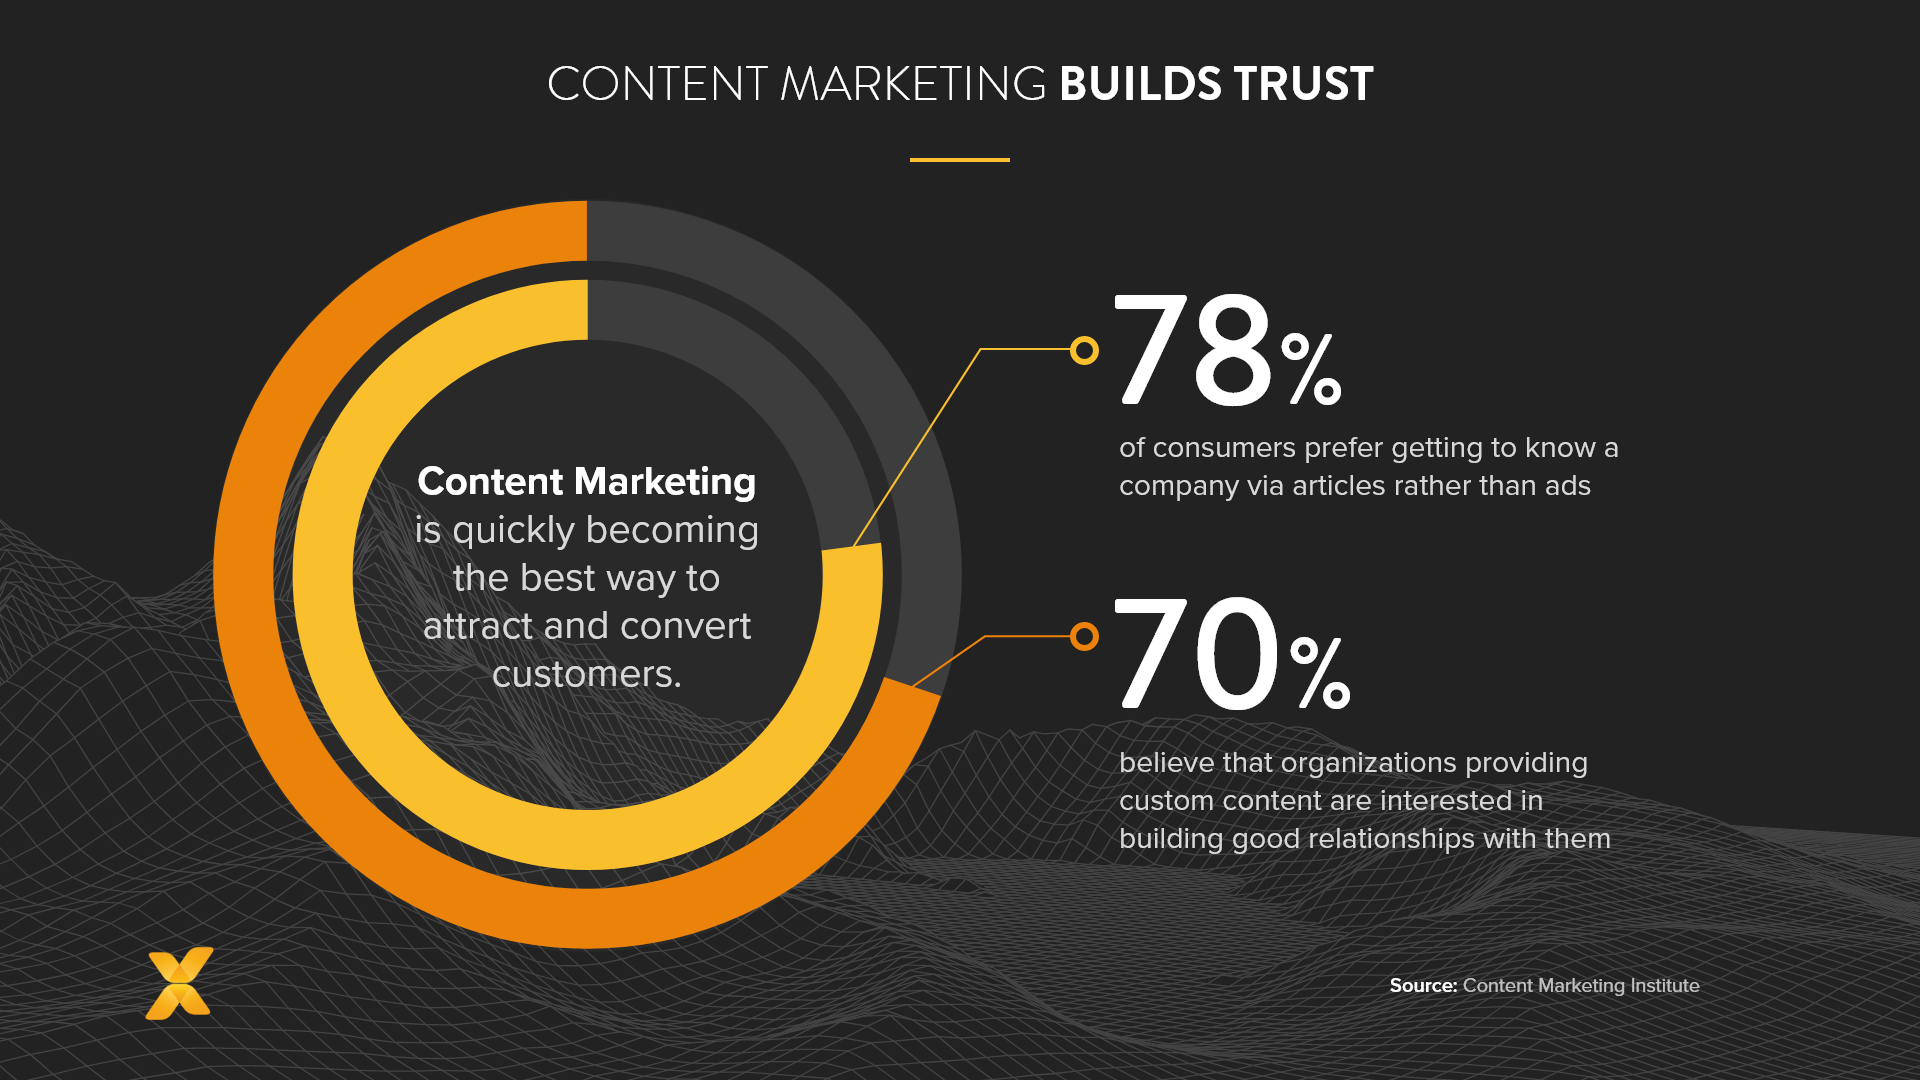 Content marketing builds trust: 78% of consumers prefers articles to ads when getting to know a company; 70% believe organizations providing custom content want to build a good relationship